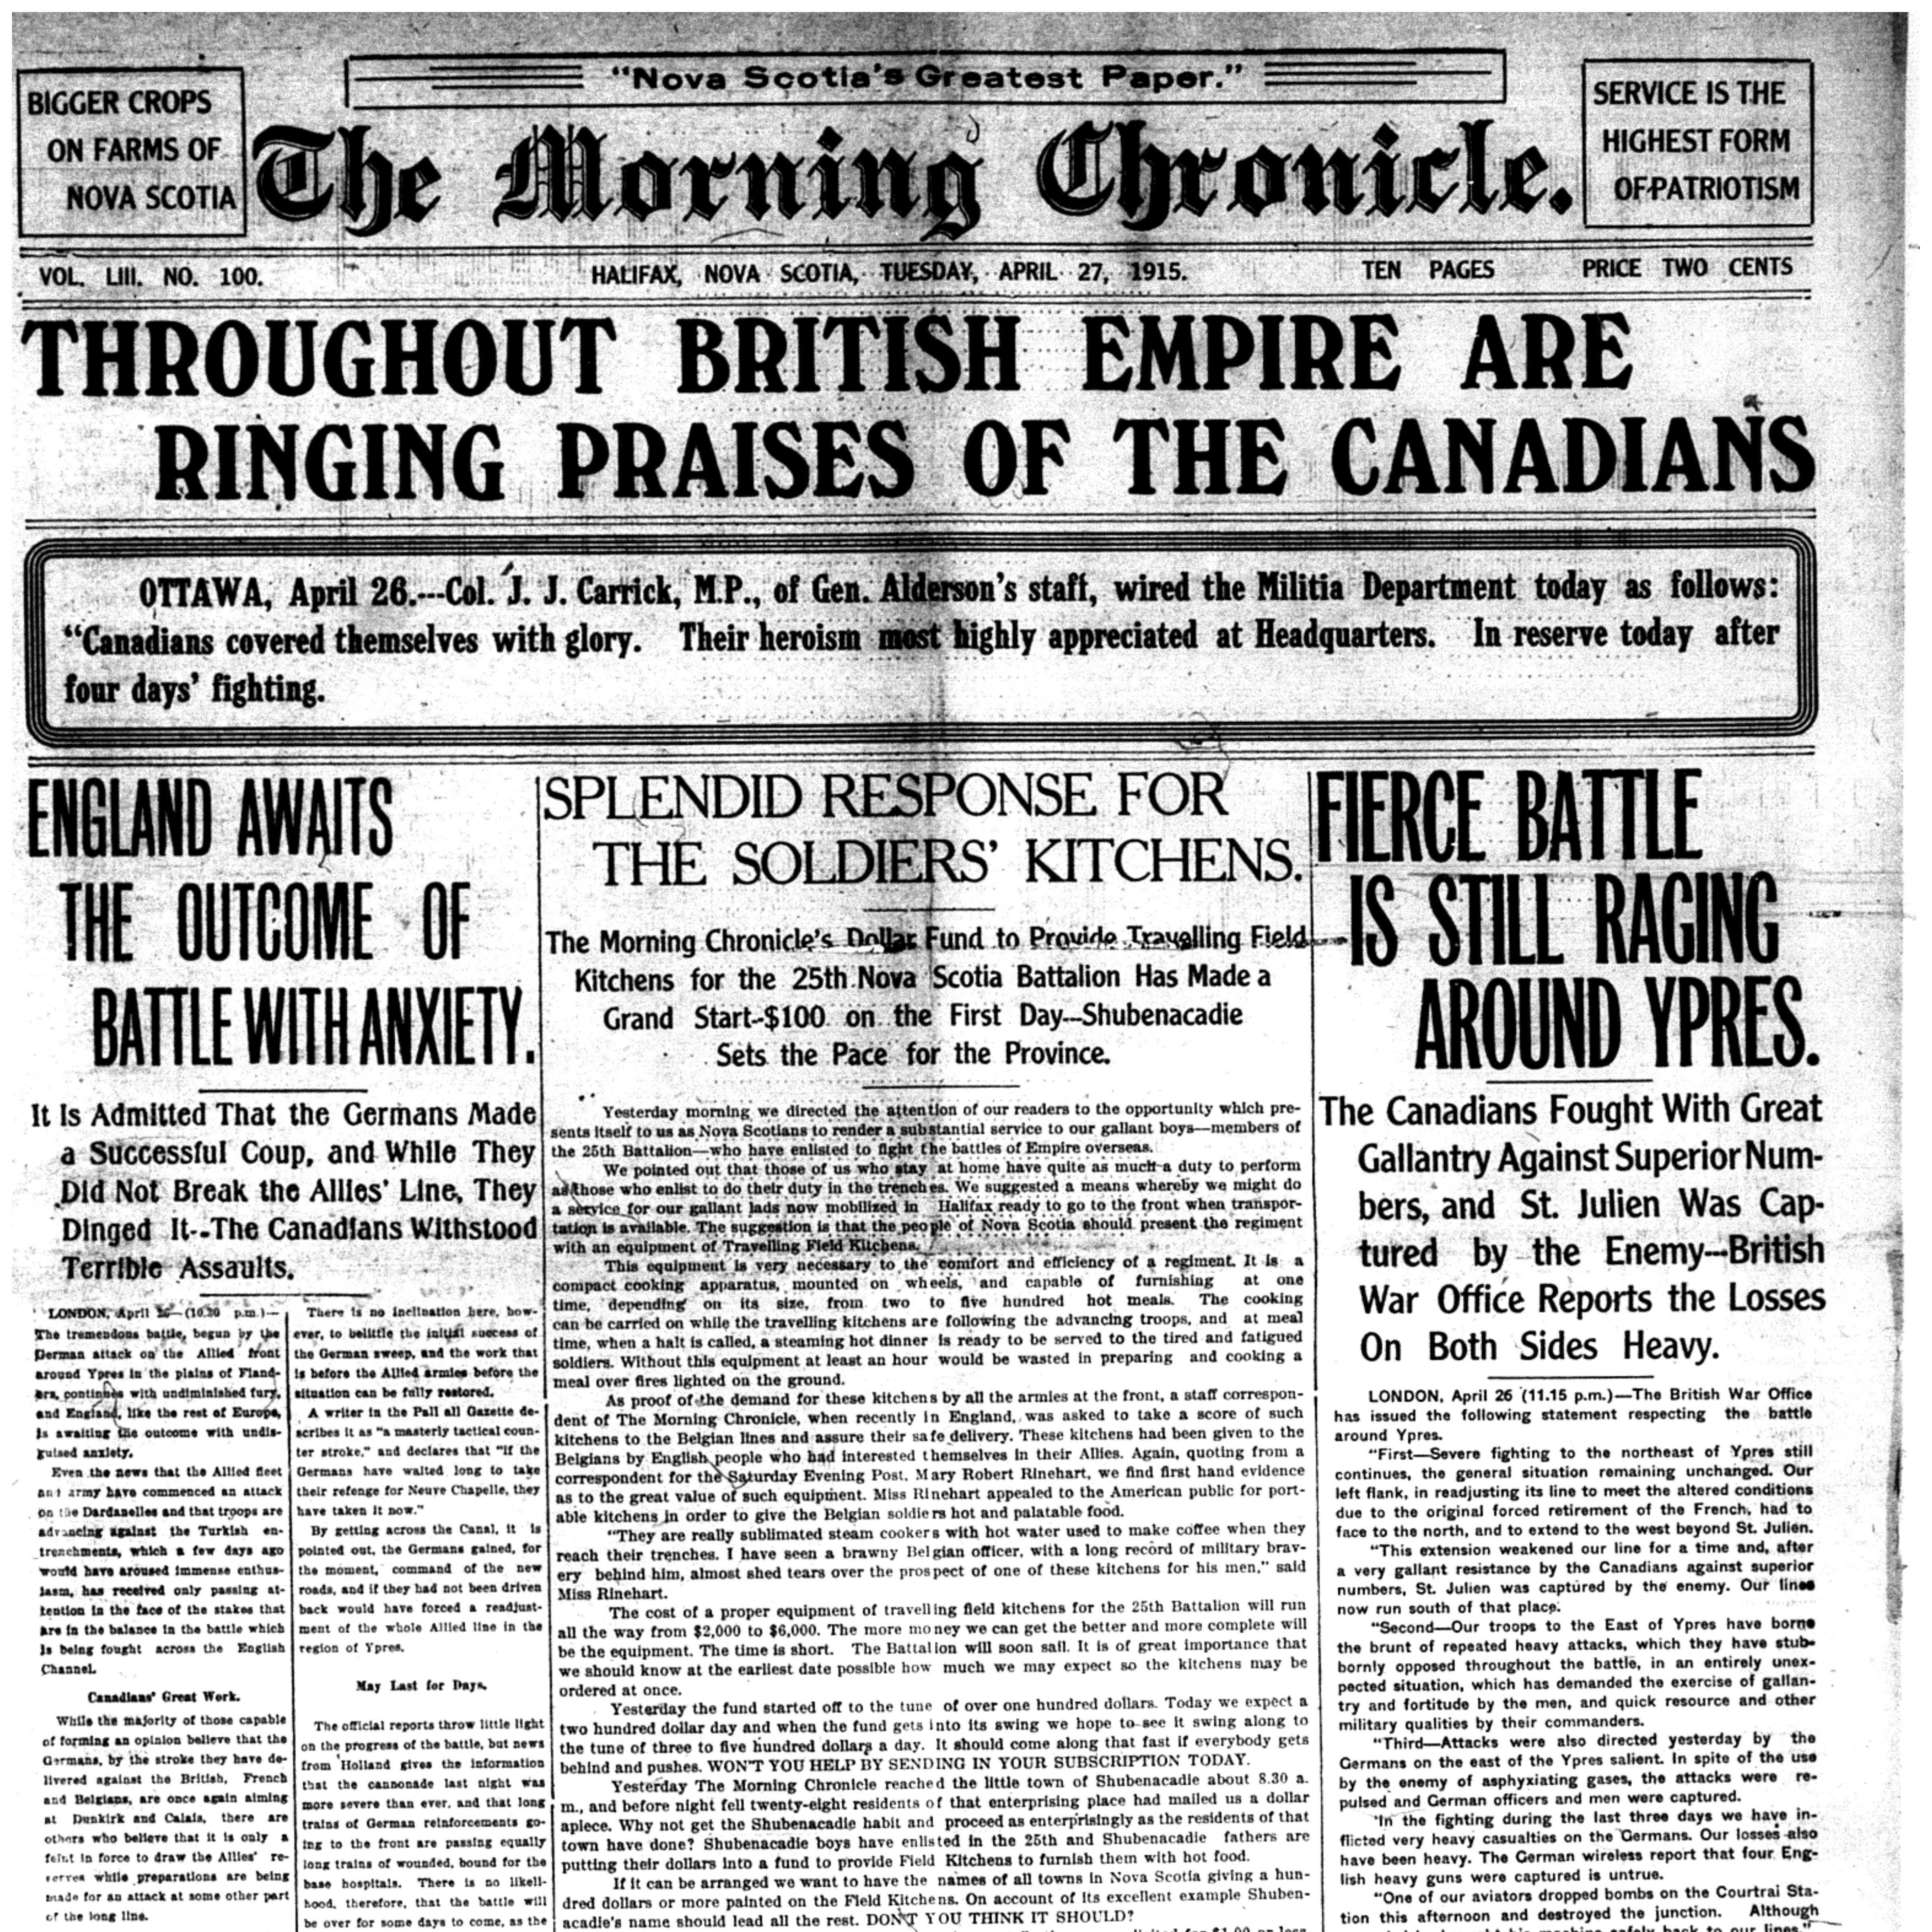 Front page of English language newspaper, the Halifax Morning Chronicle.